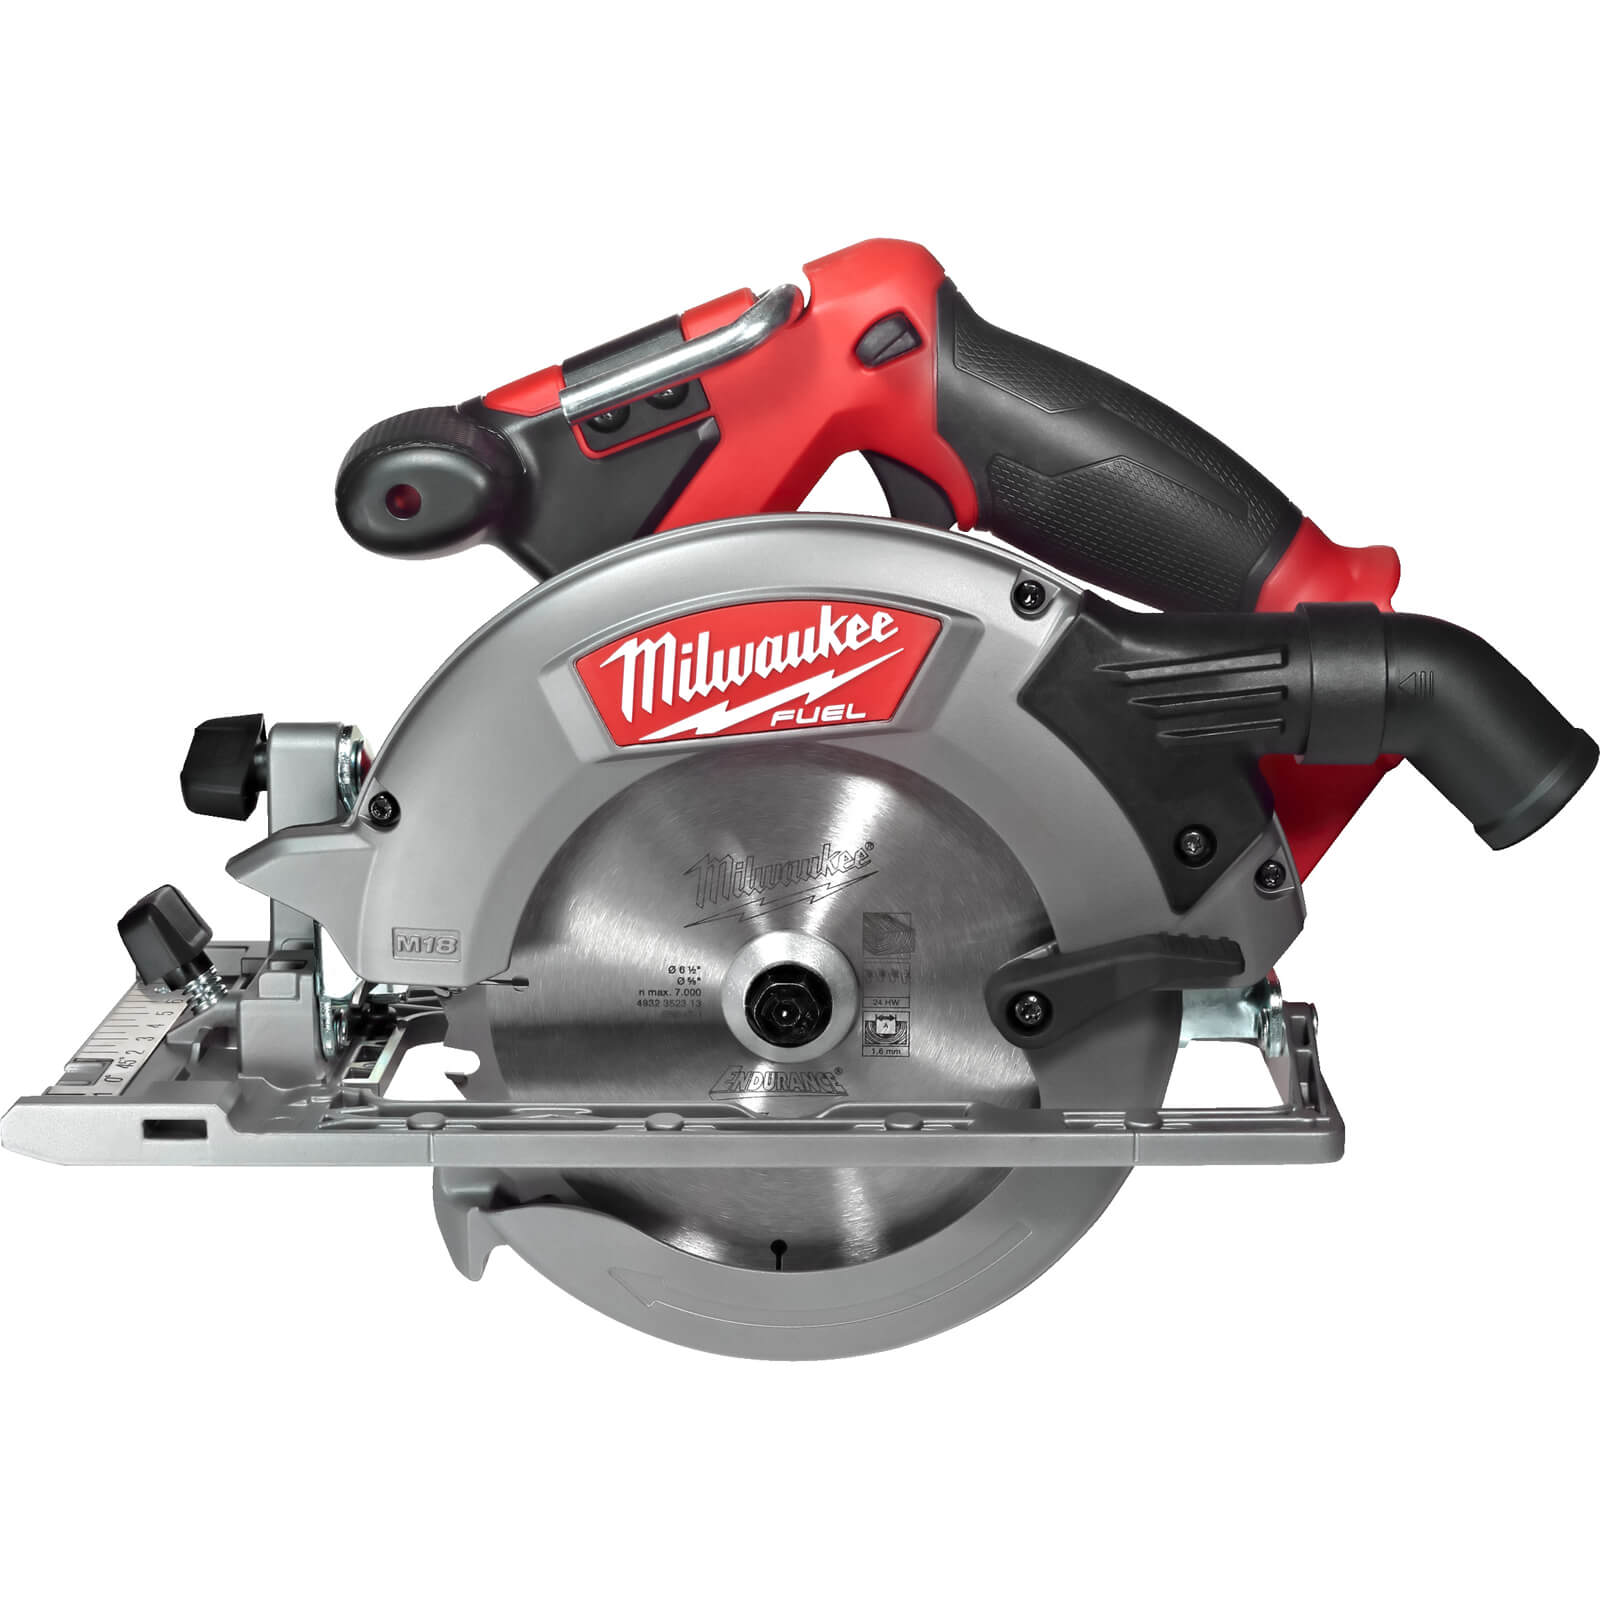 Image of Milwaukee M18 CCS55 Fuel 18v Cordless Brushless Circular Saw 165mm No Batteries No Charger No Case